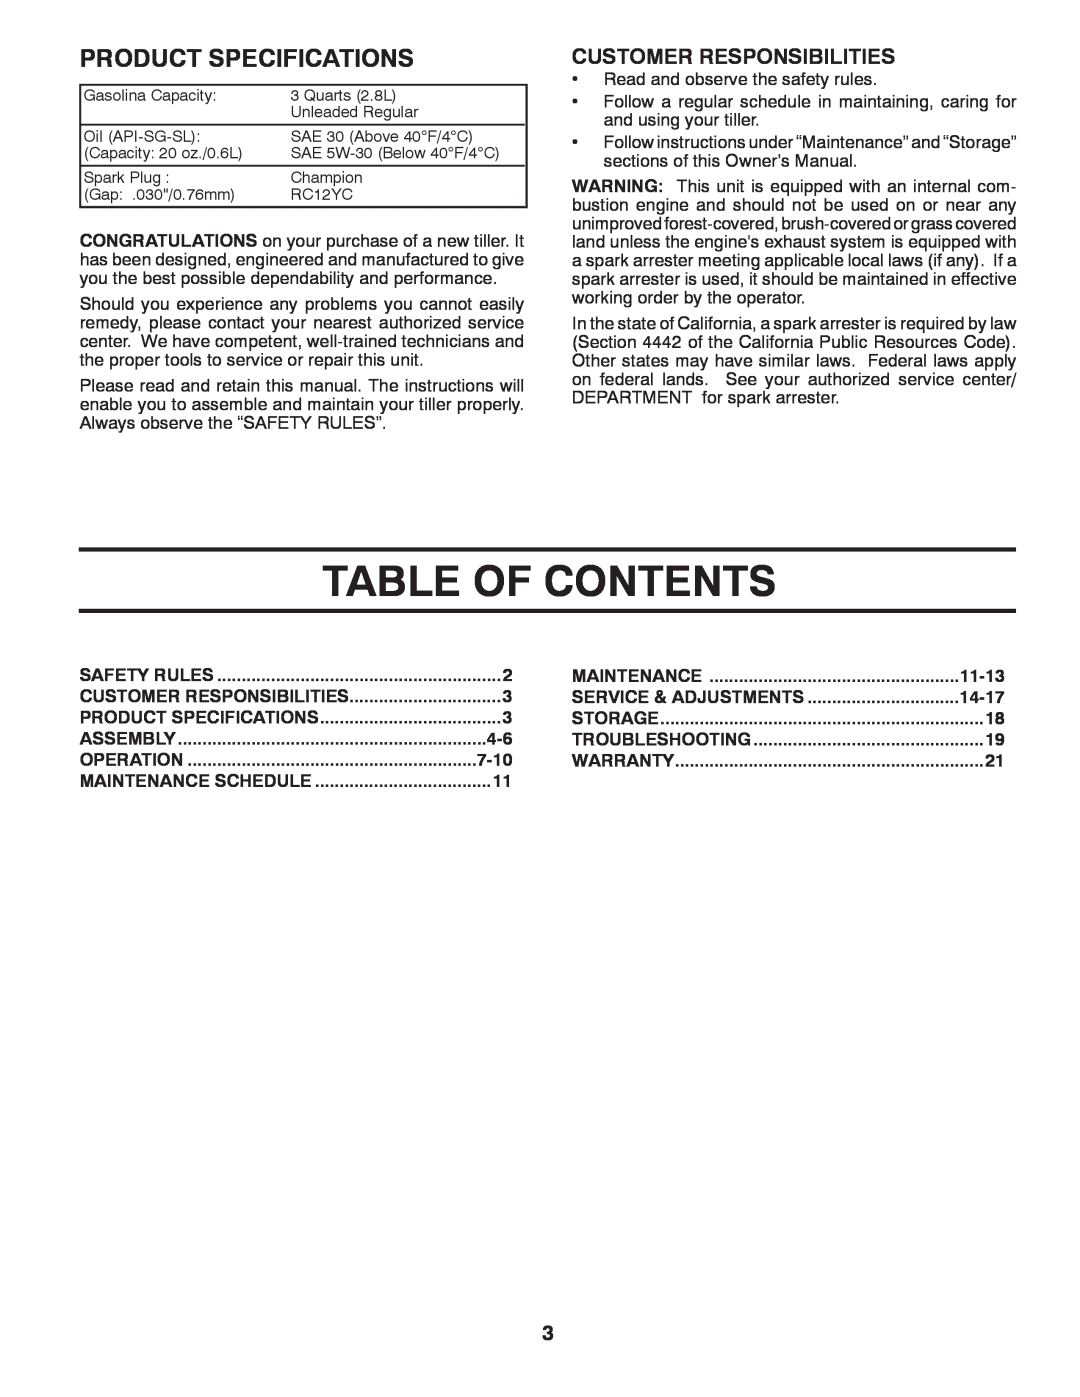 Poulan 96092001500, 418121 manual Table Of Contents, Product Specifications, Customer Responsibilities, 11-13, 14-17, 7-10 